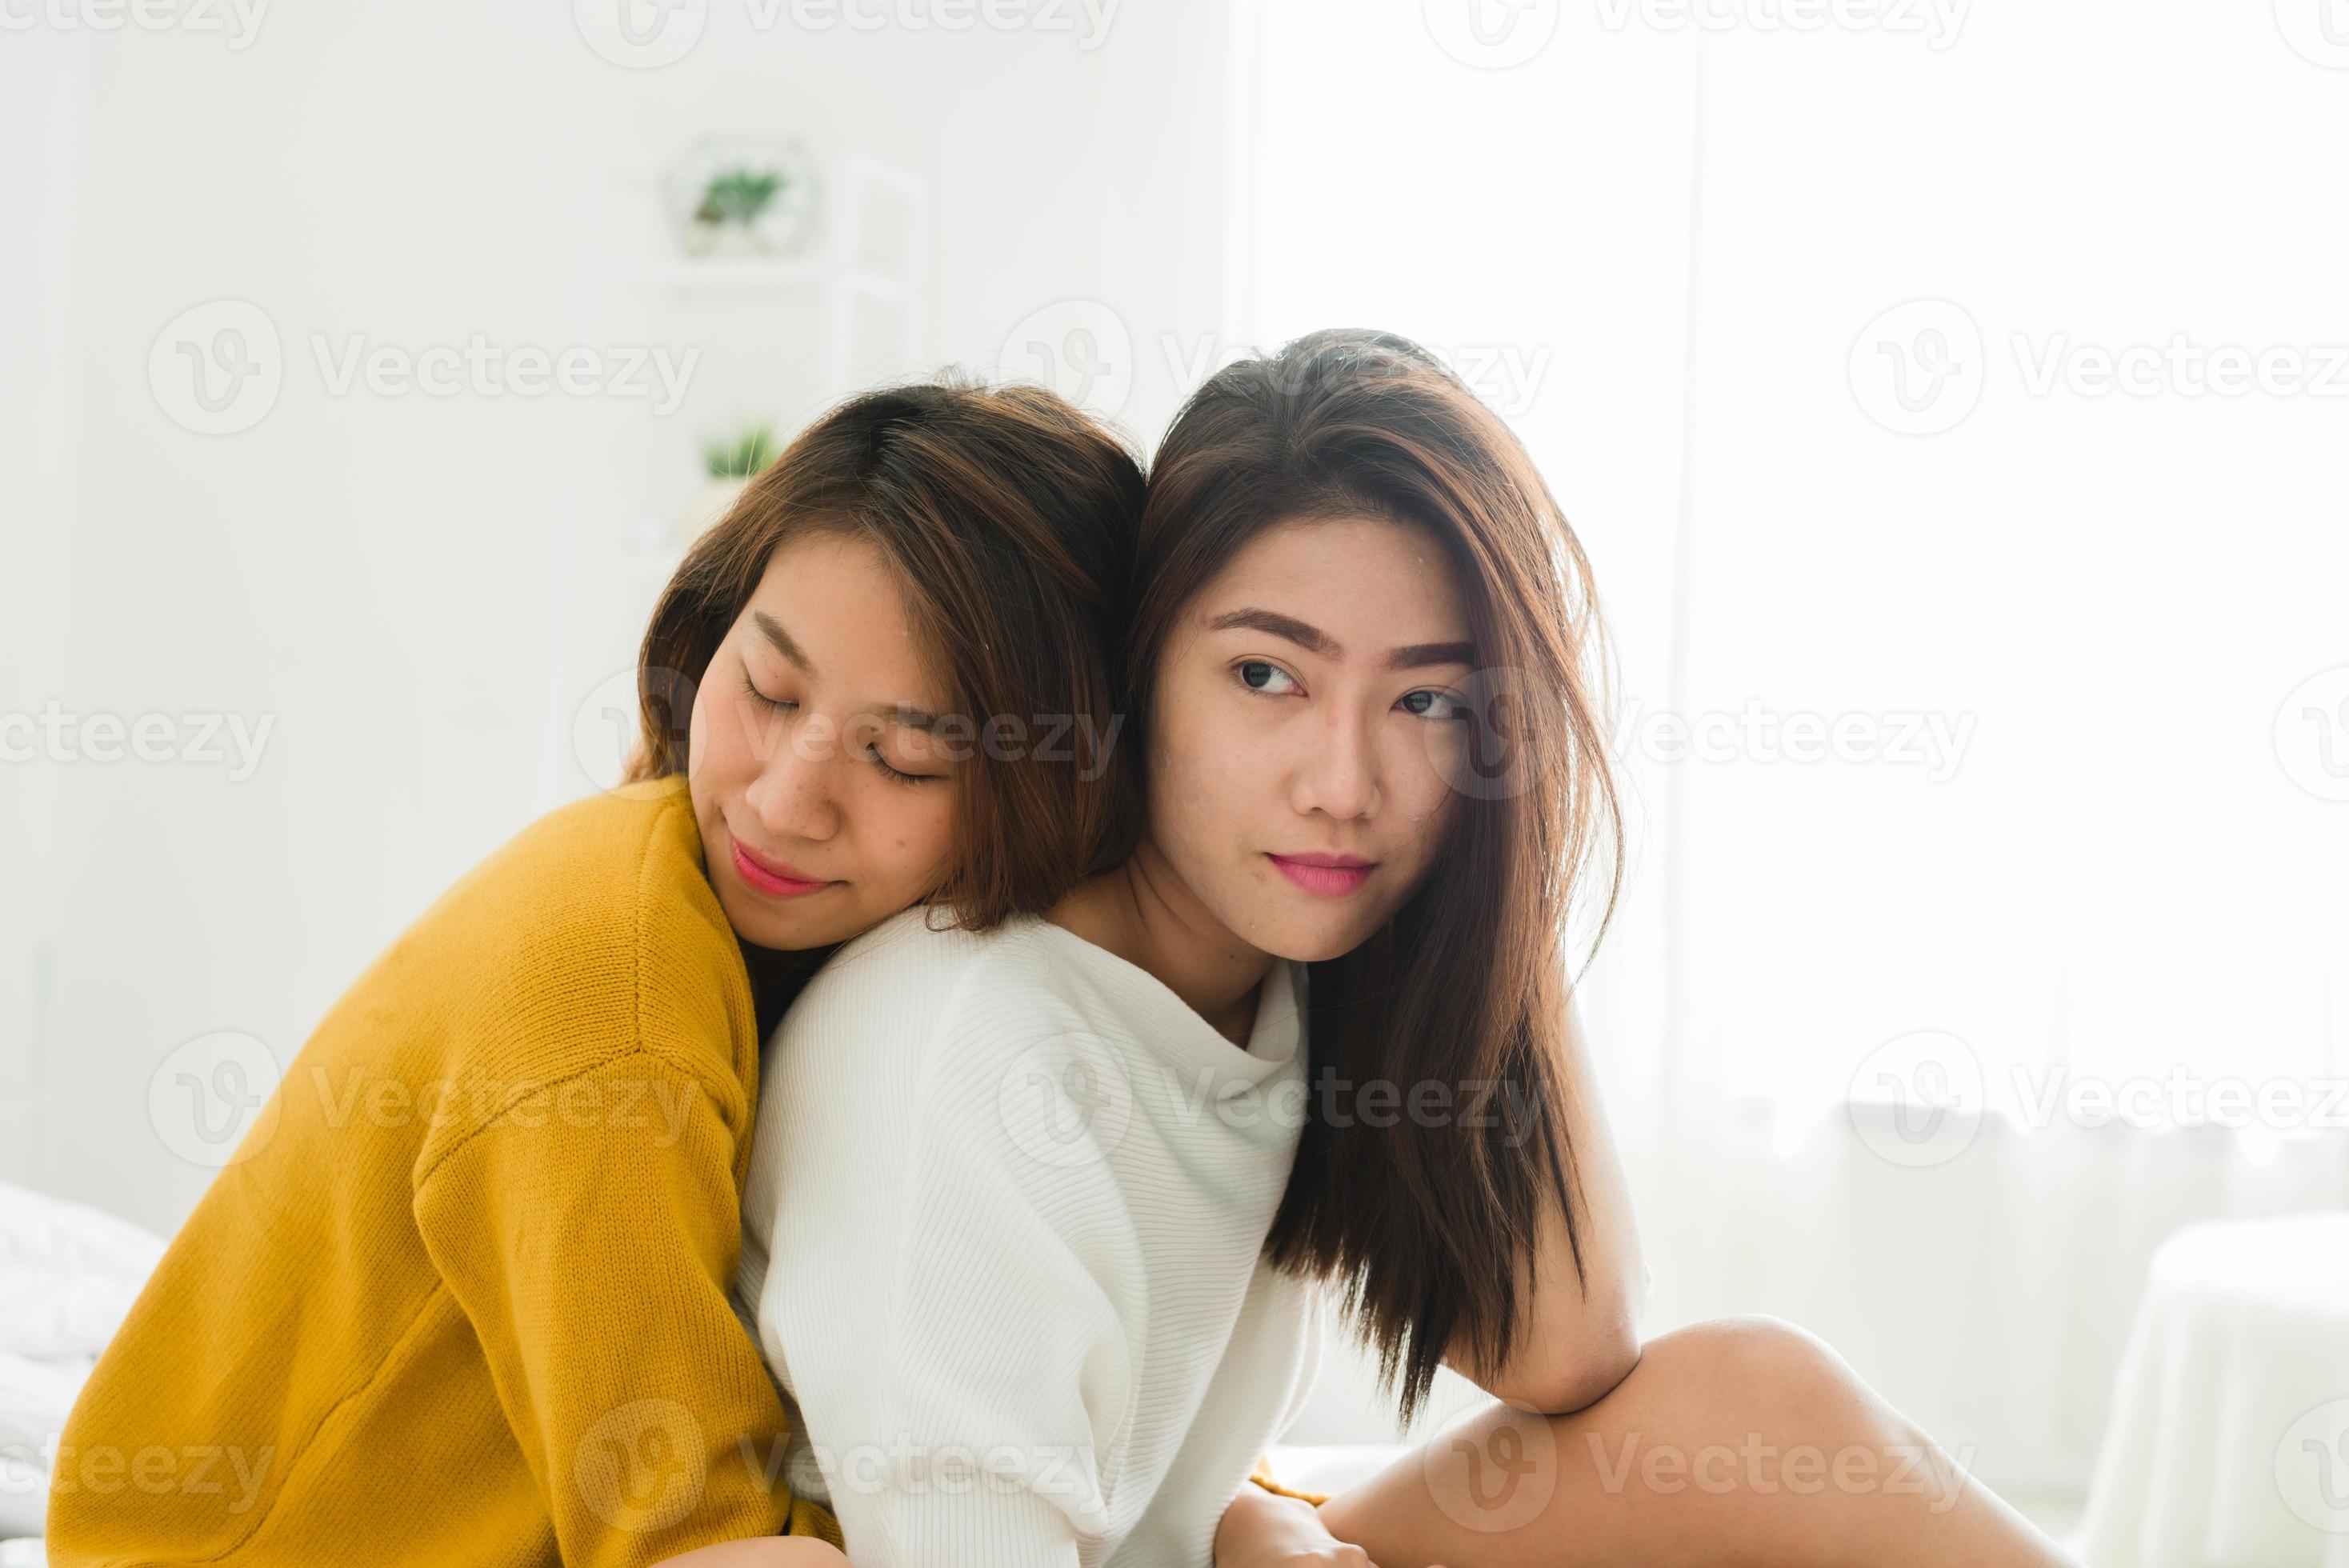 Beautiful young asian women LGBT lesbian happy couple sitting on bed hugging and smiling together in bedroom at home. LGBT lesbian couple together indoors concept pic